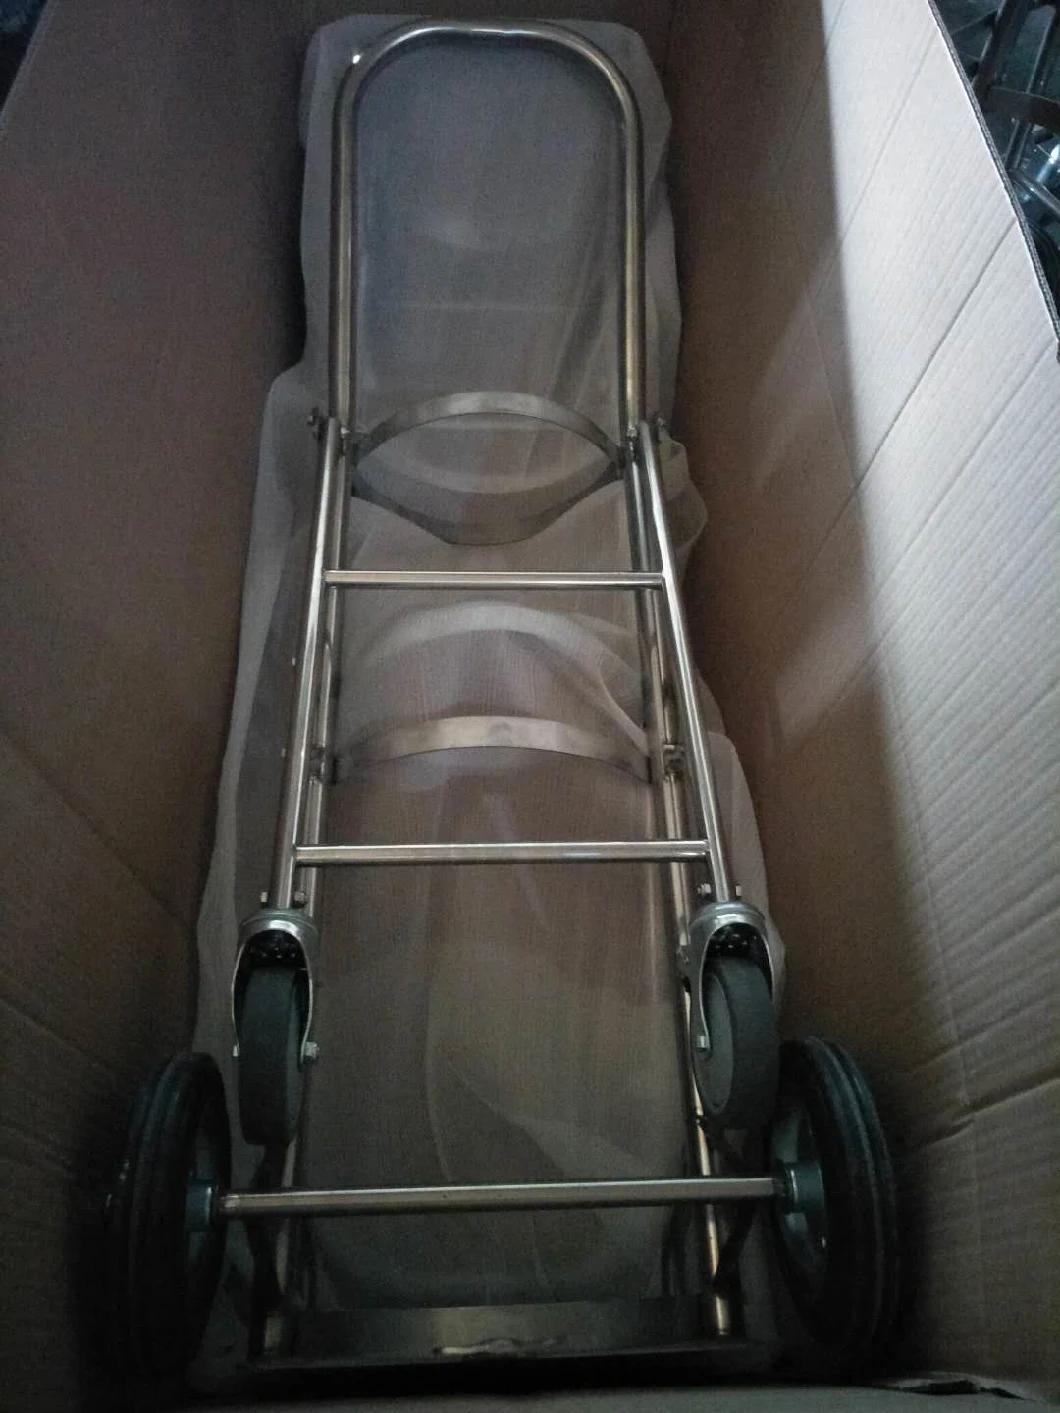 Stainless Steel Oxygen Tank Trolley for Gas Cylinder Hospital Furniture (SLV-E4007)